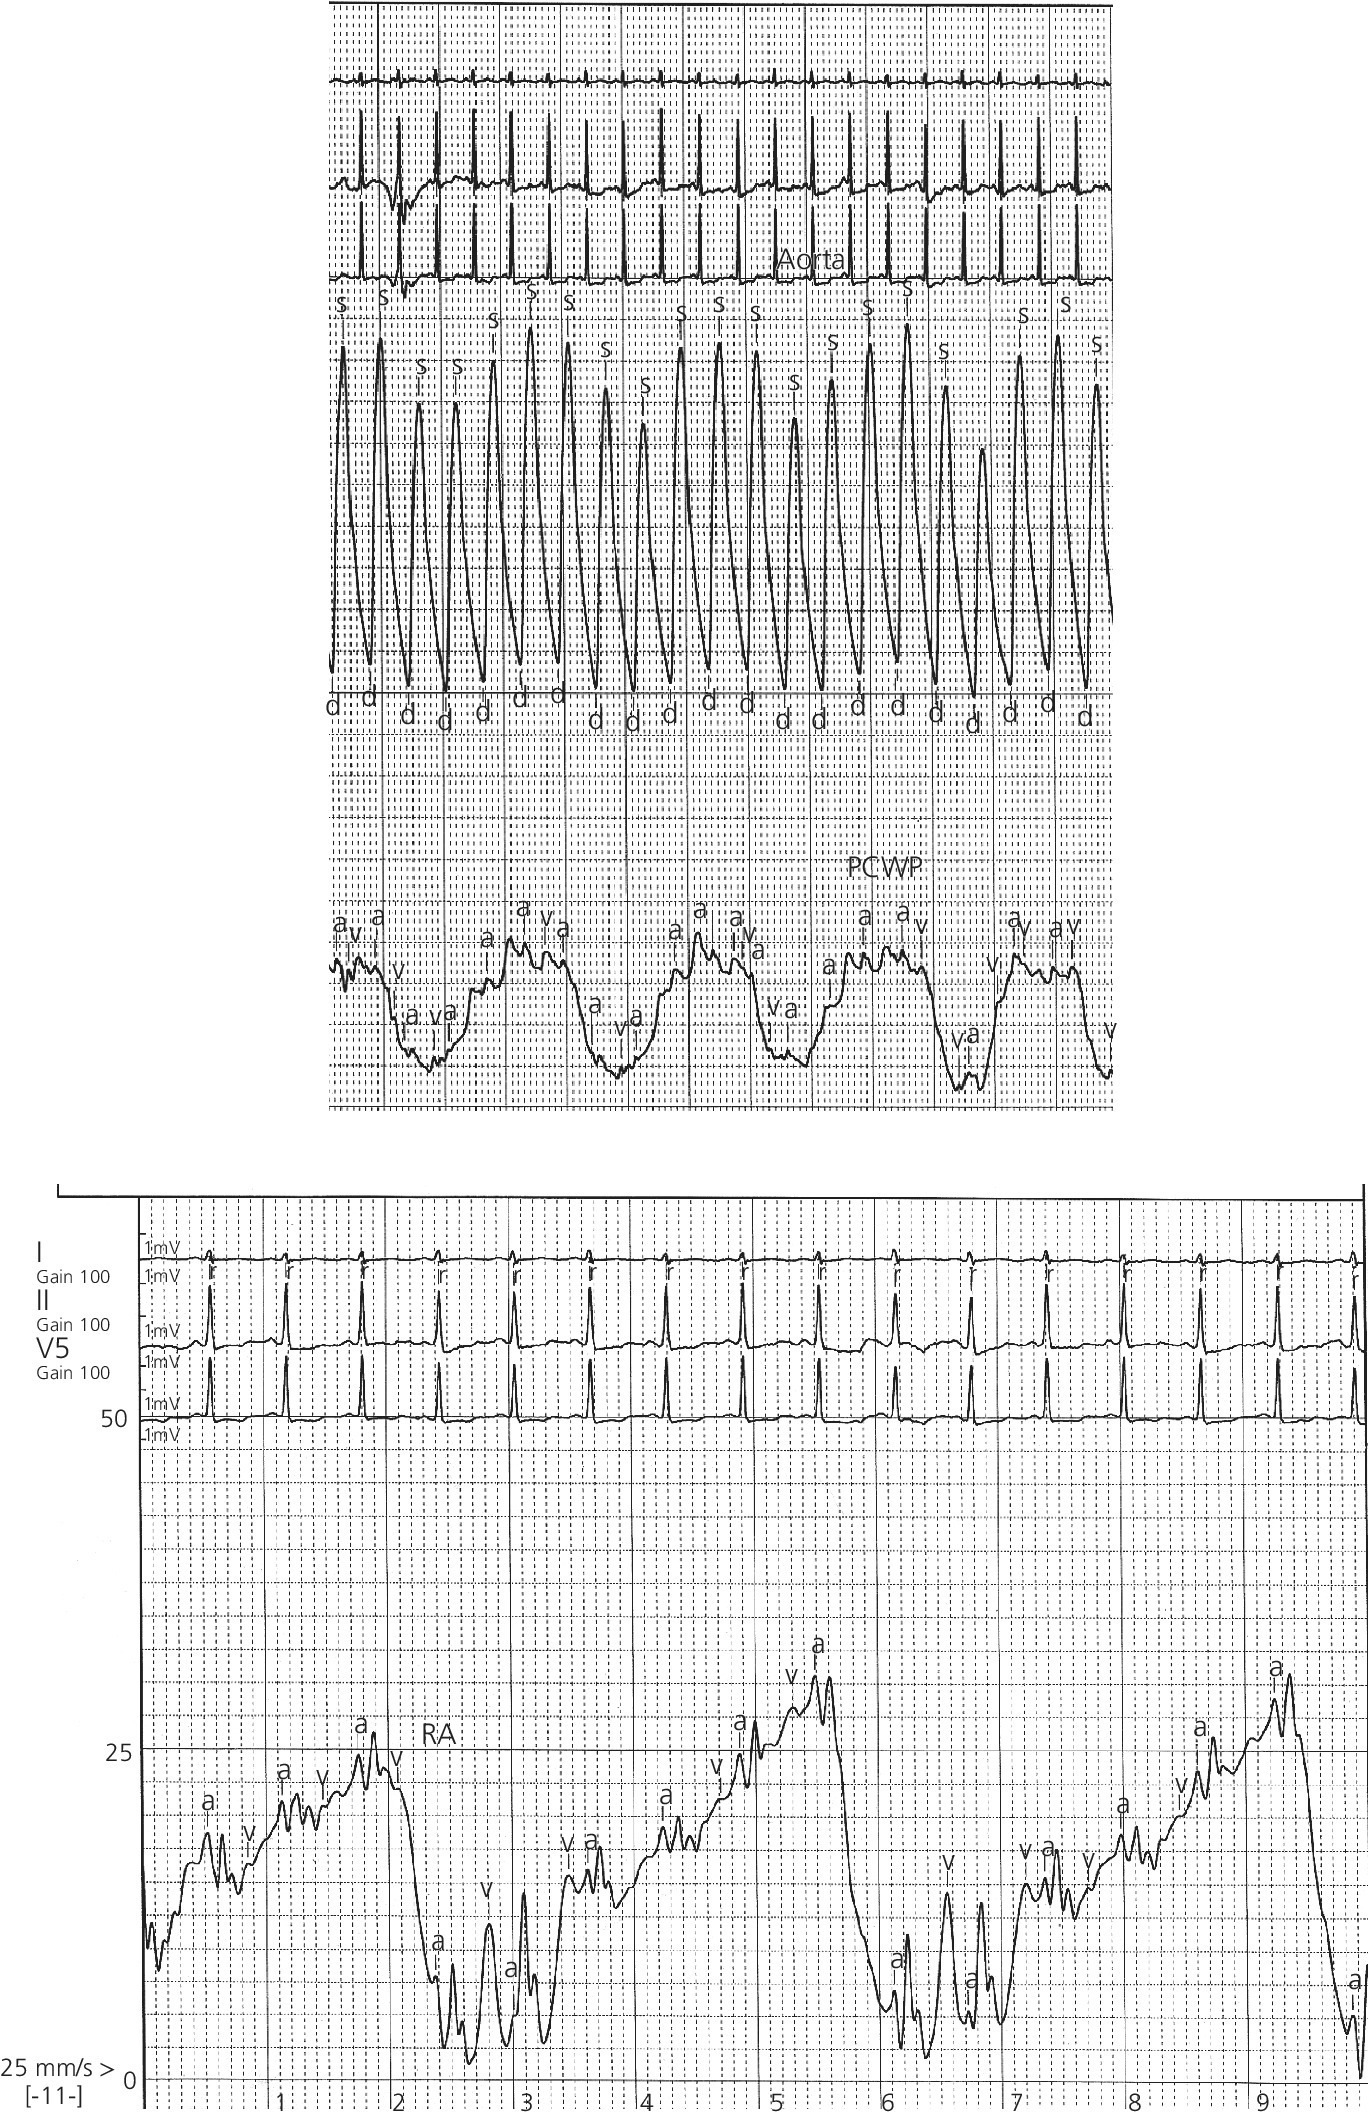 2 Electrocardiogram illustrating the effect of respiratory variation on RA and PCW pressures.